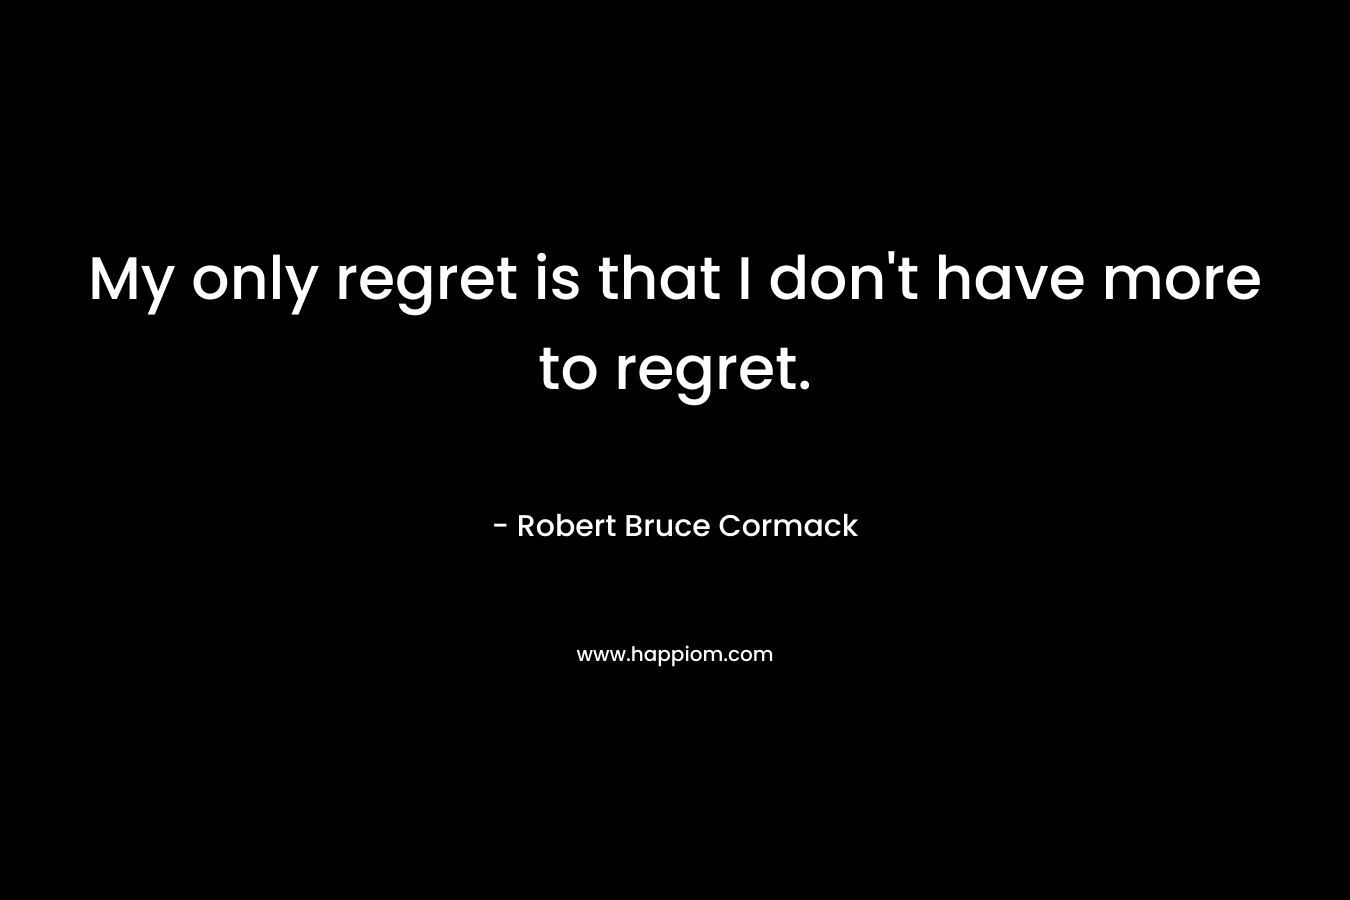 My only regret is that I don't have more to regret.